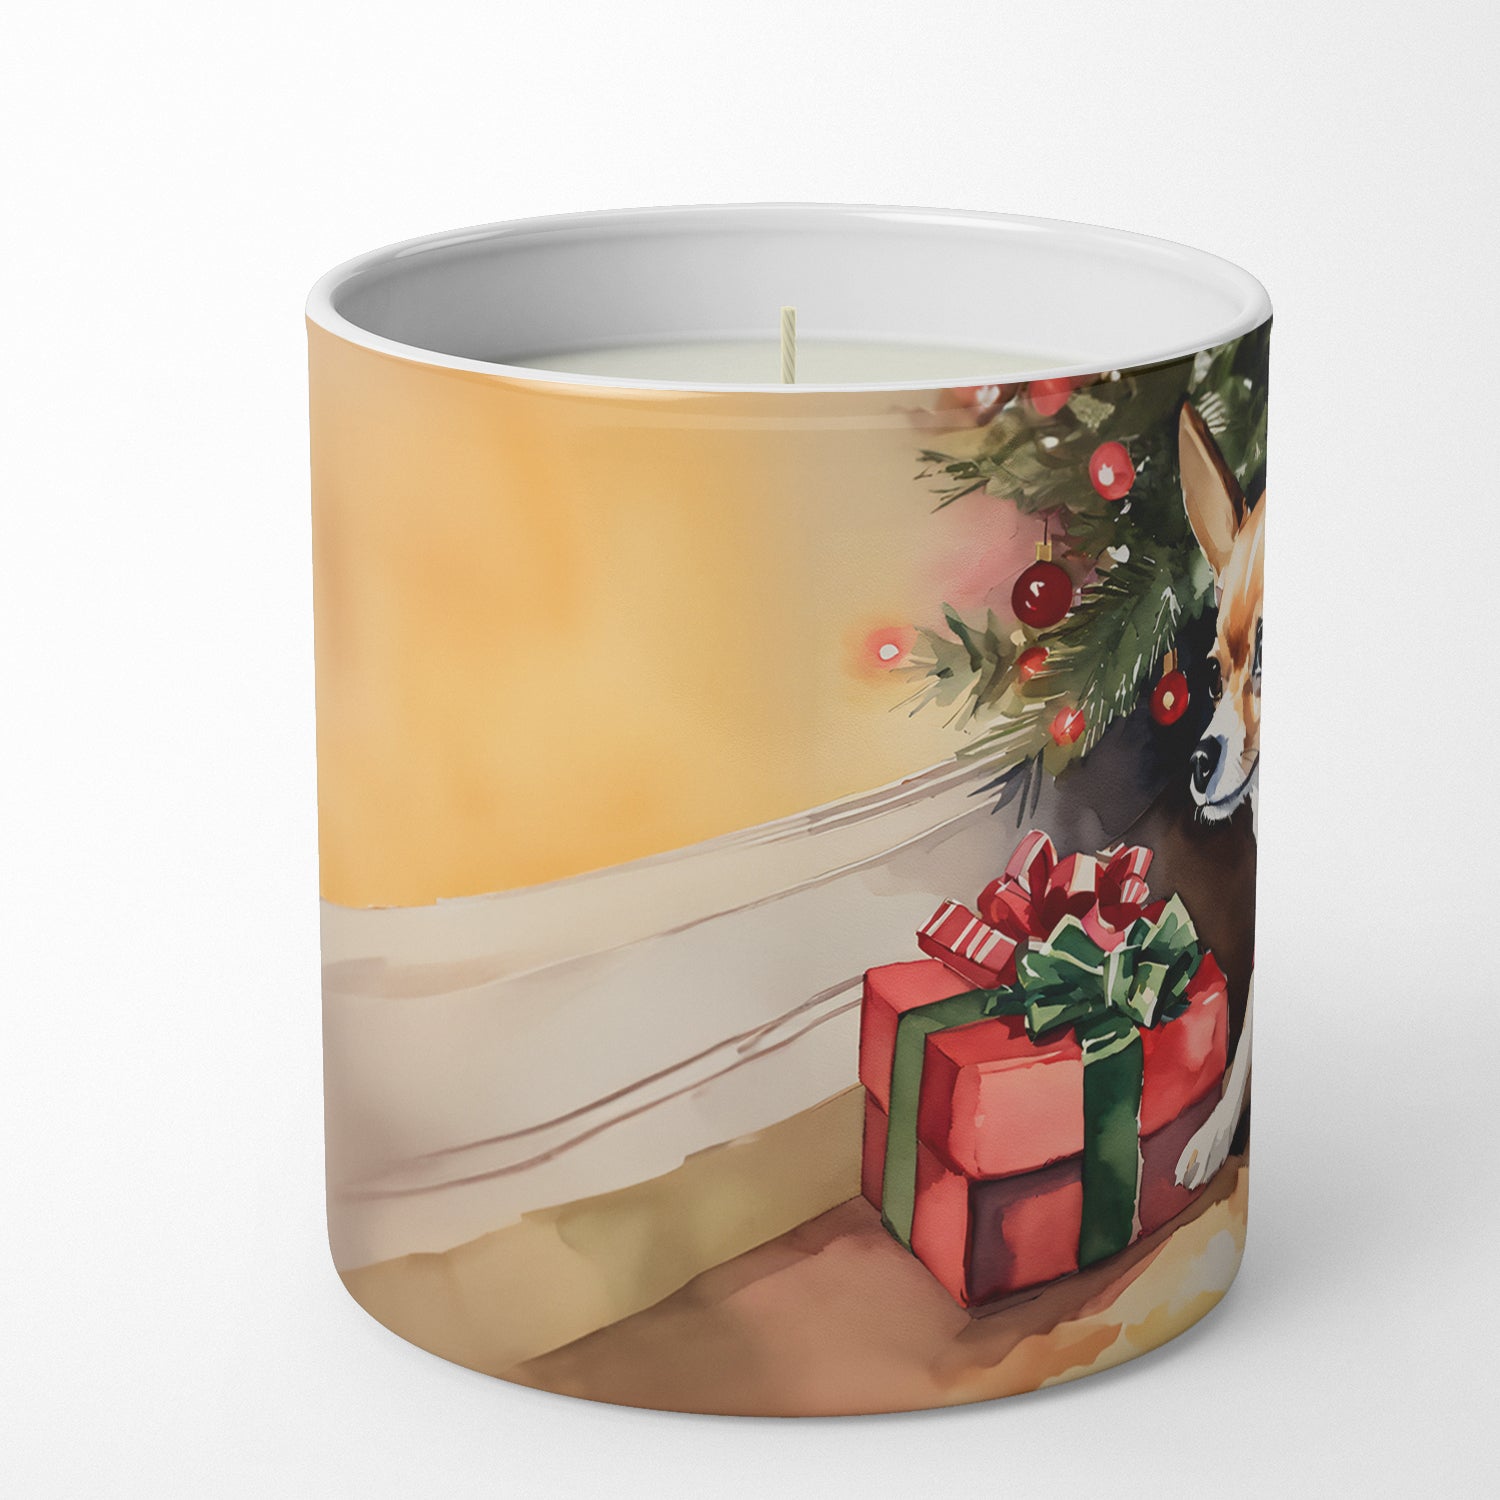 Chihuahua Cozy Christmas Decorative Soy Candle